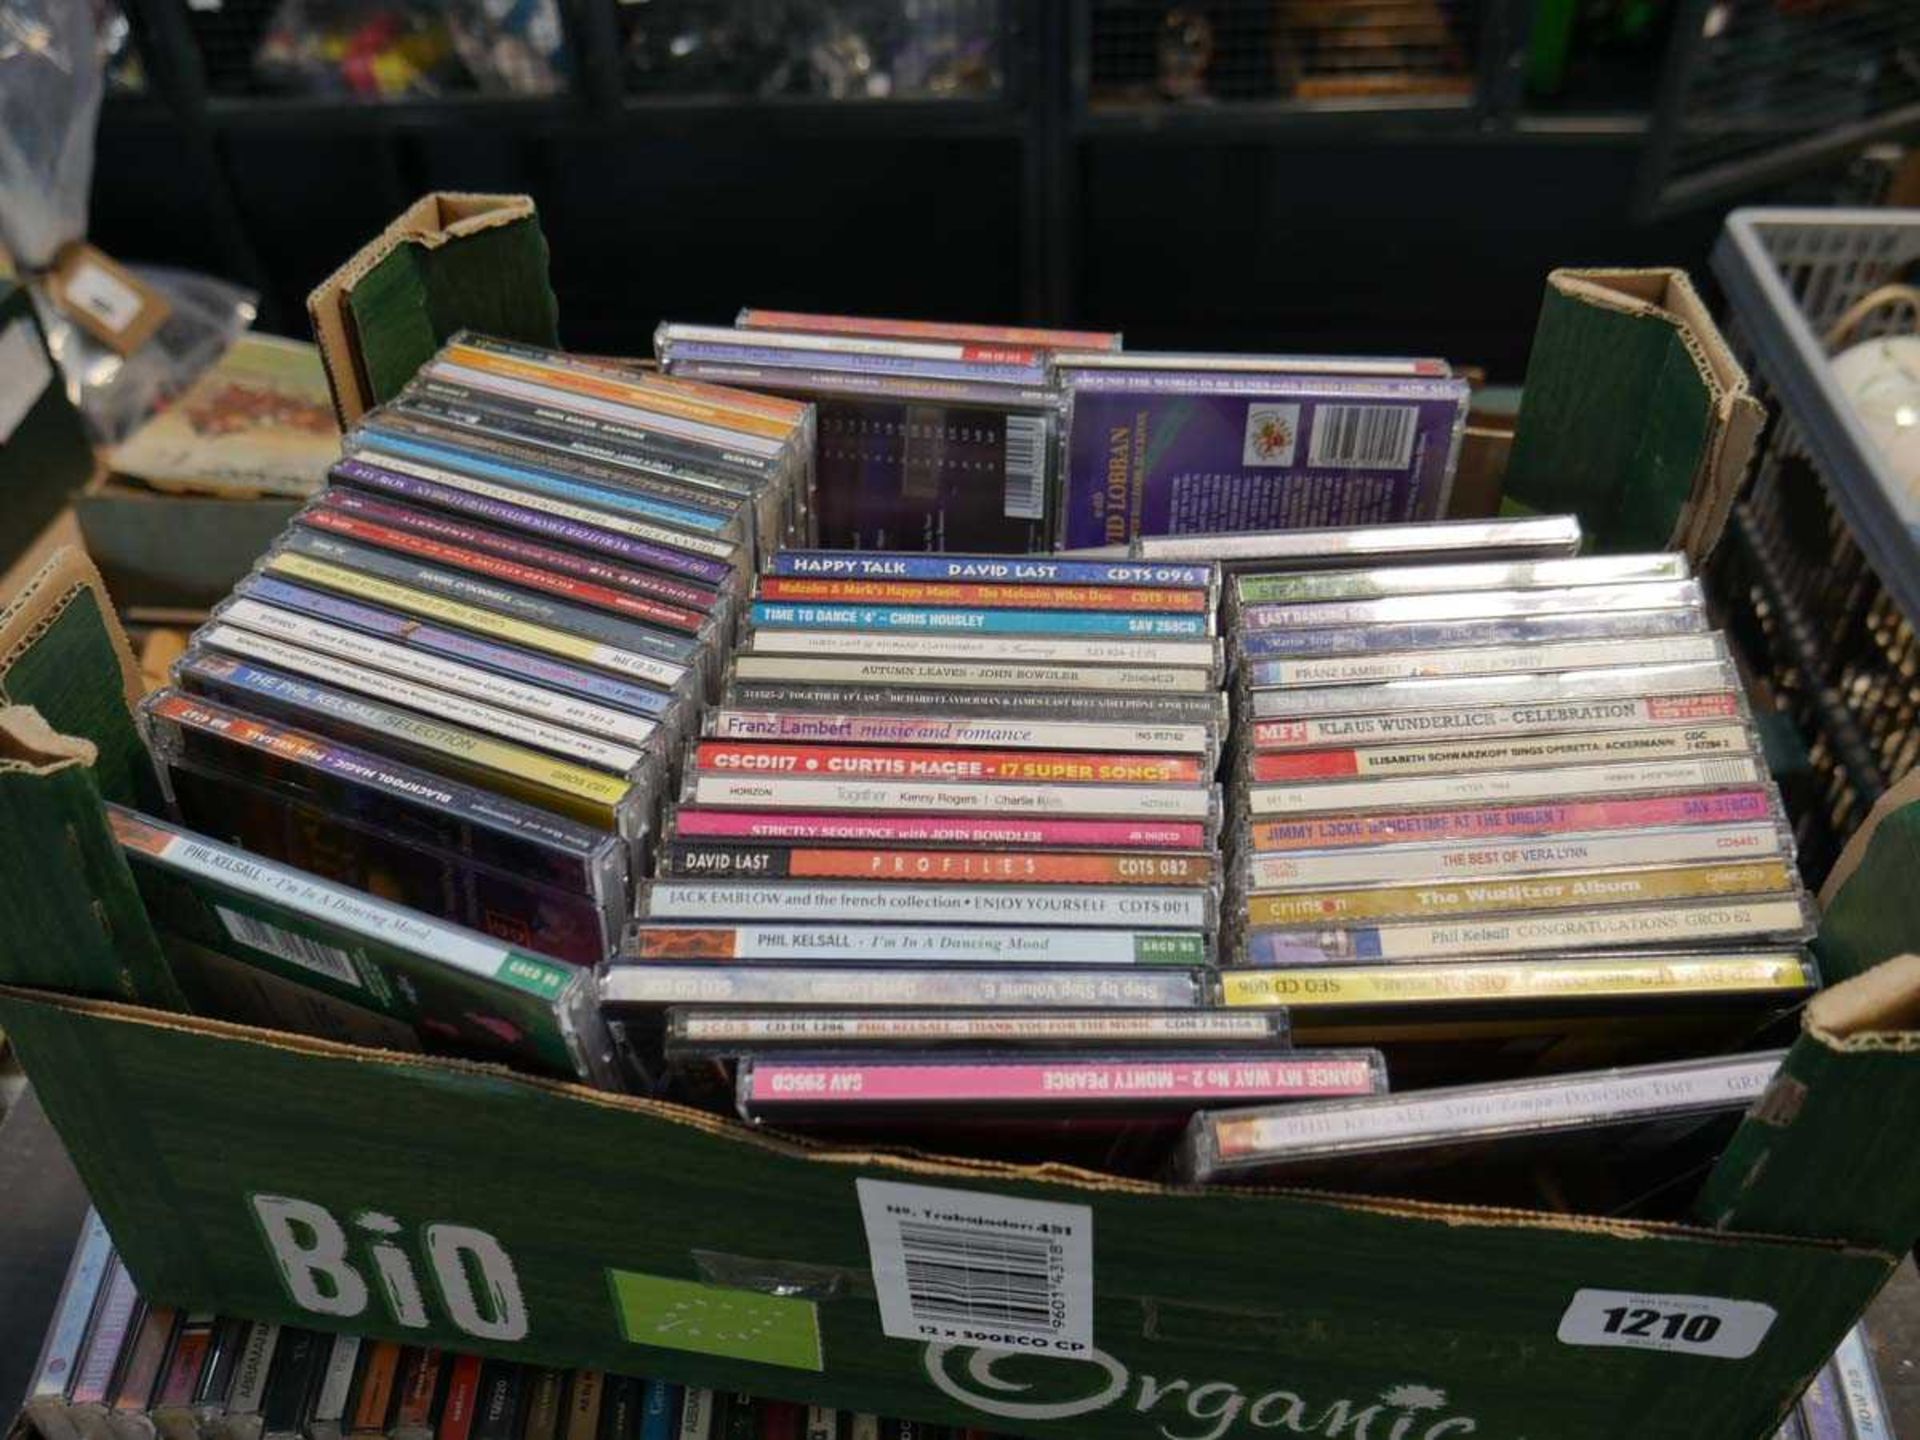 Crate of DVDs and 2 crates of CDs